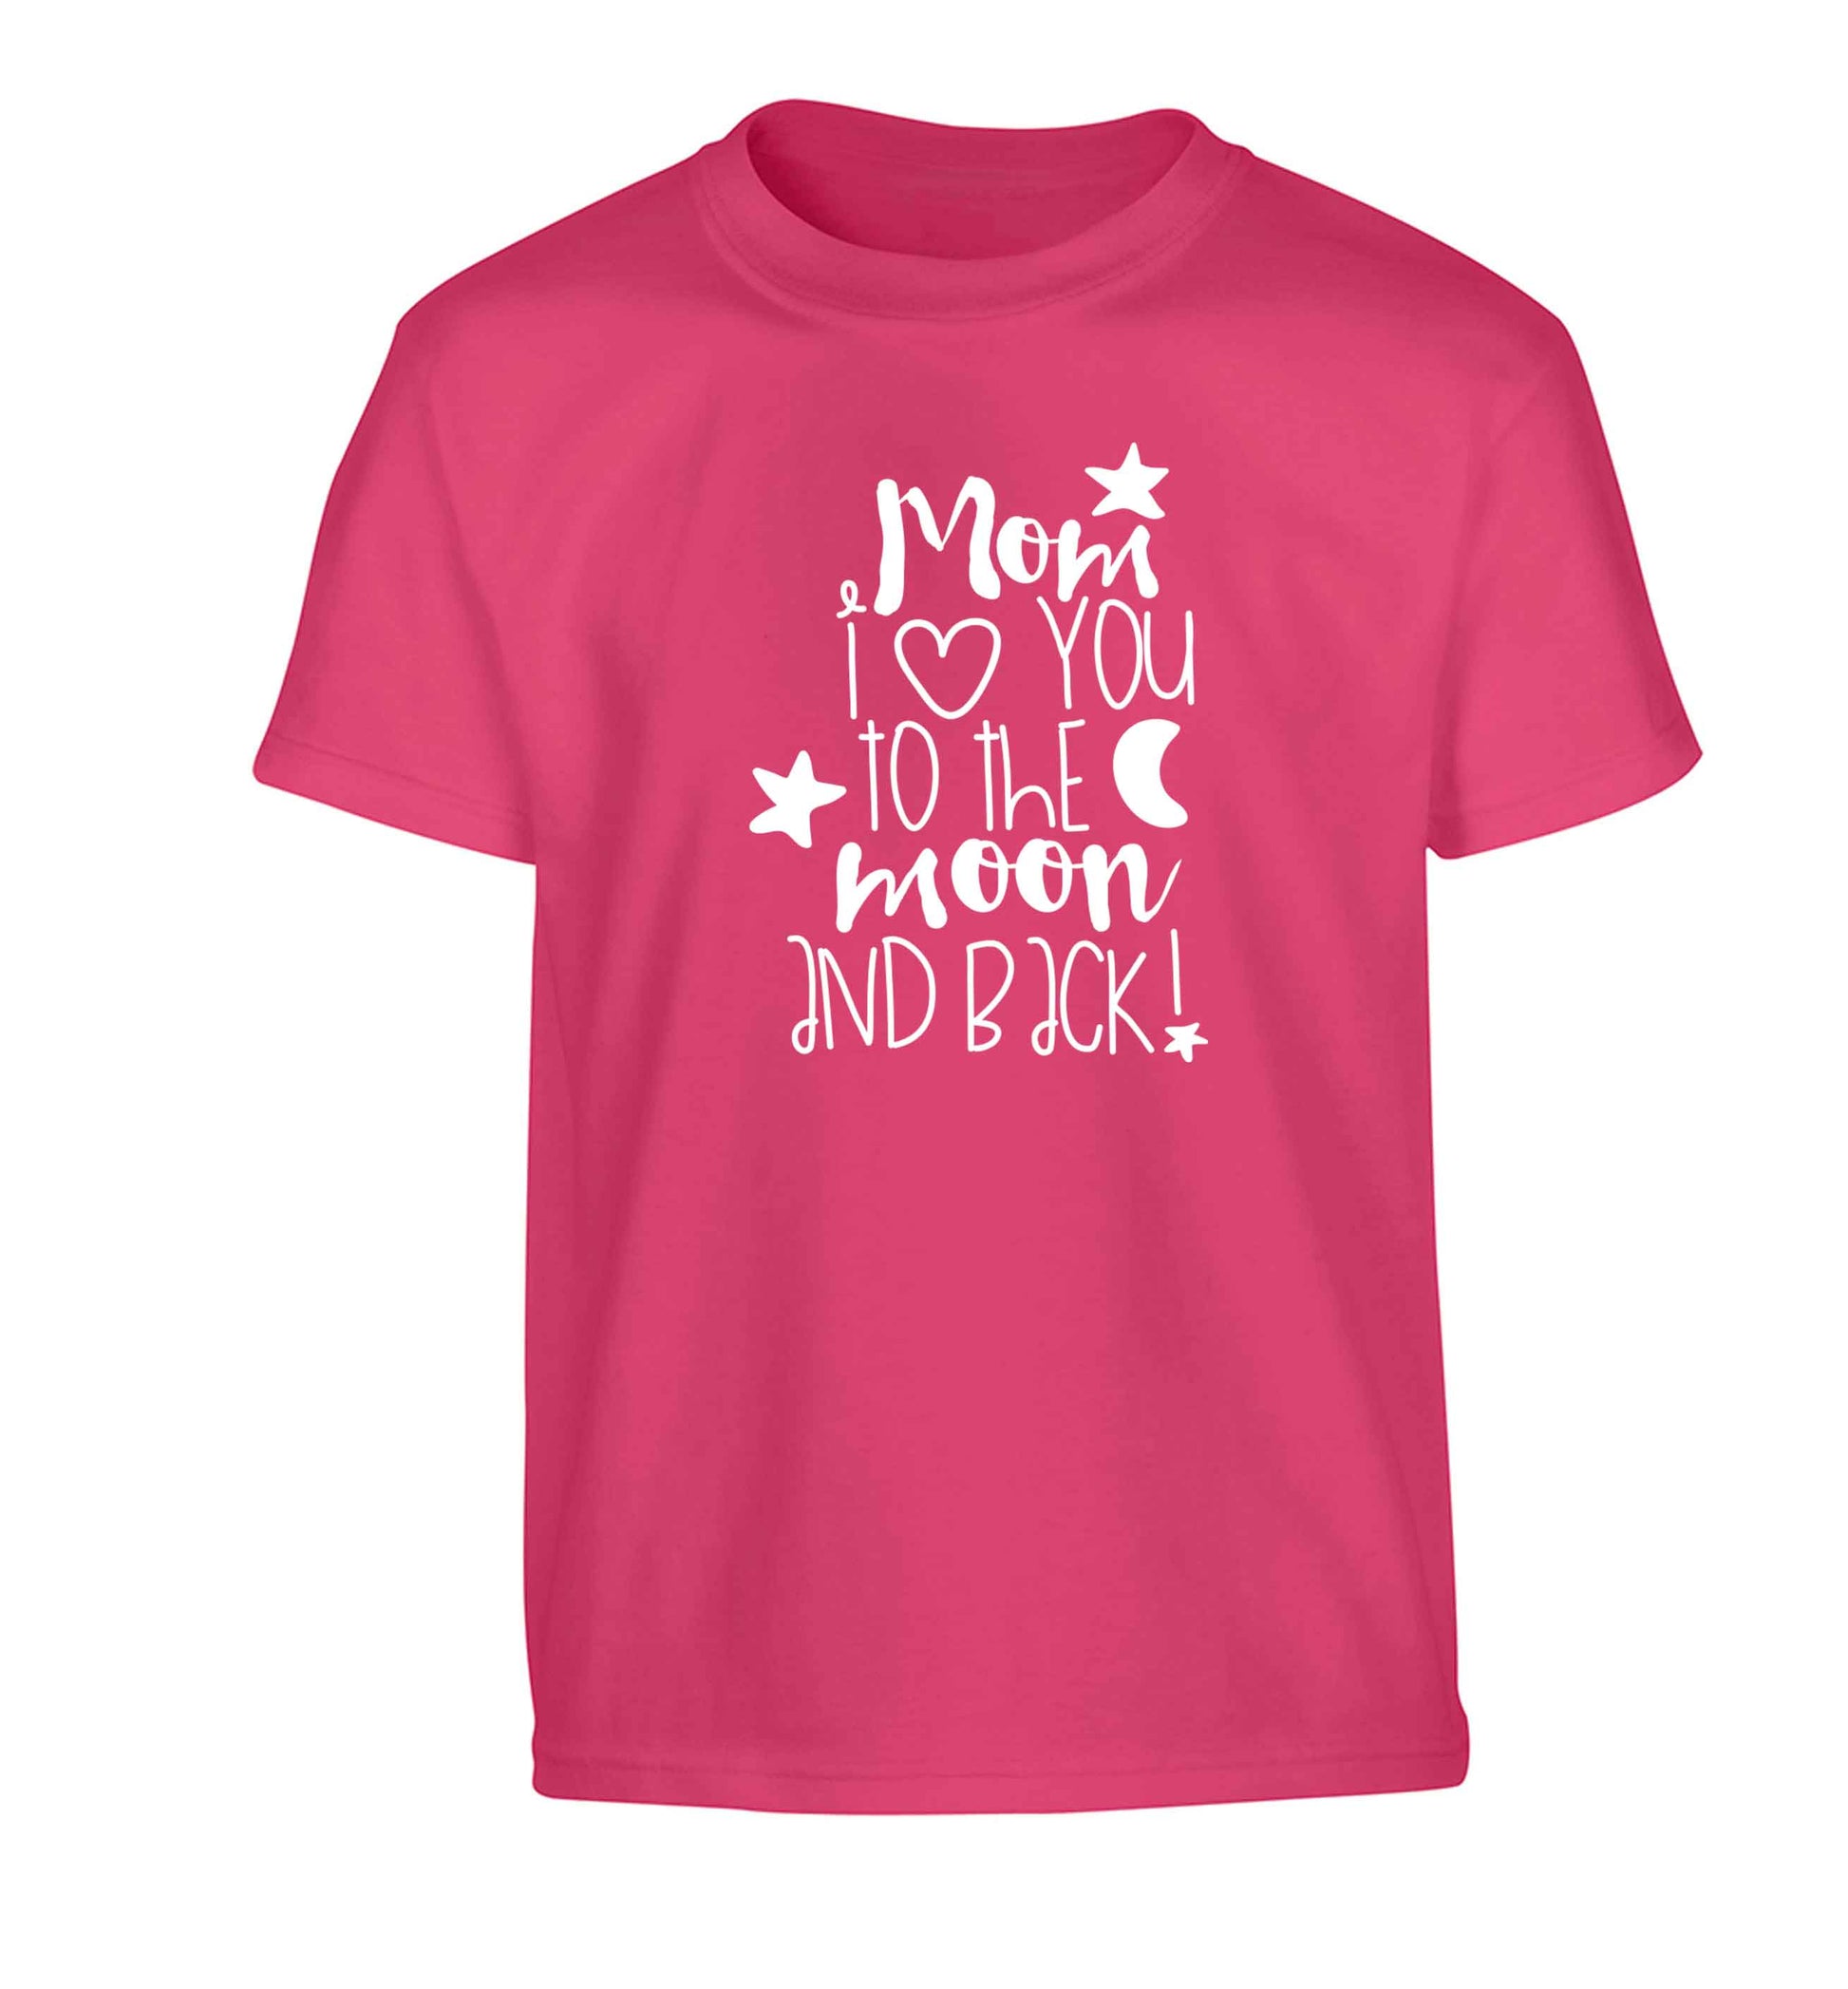 Mom I love you to the moon and back Children's pink Tshirt 12-13 Years